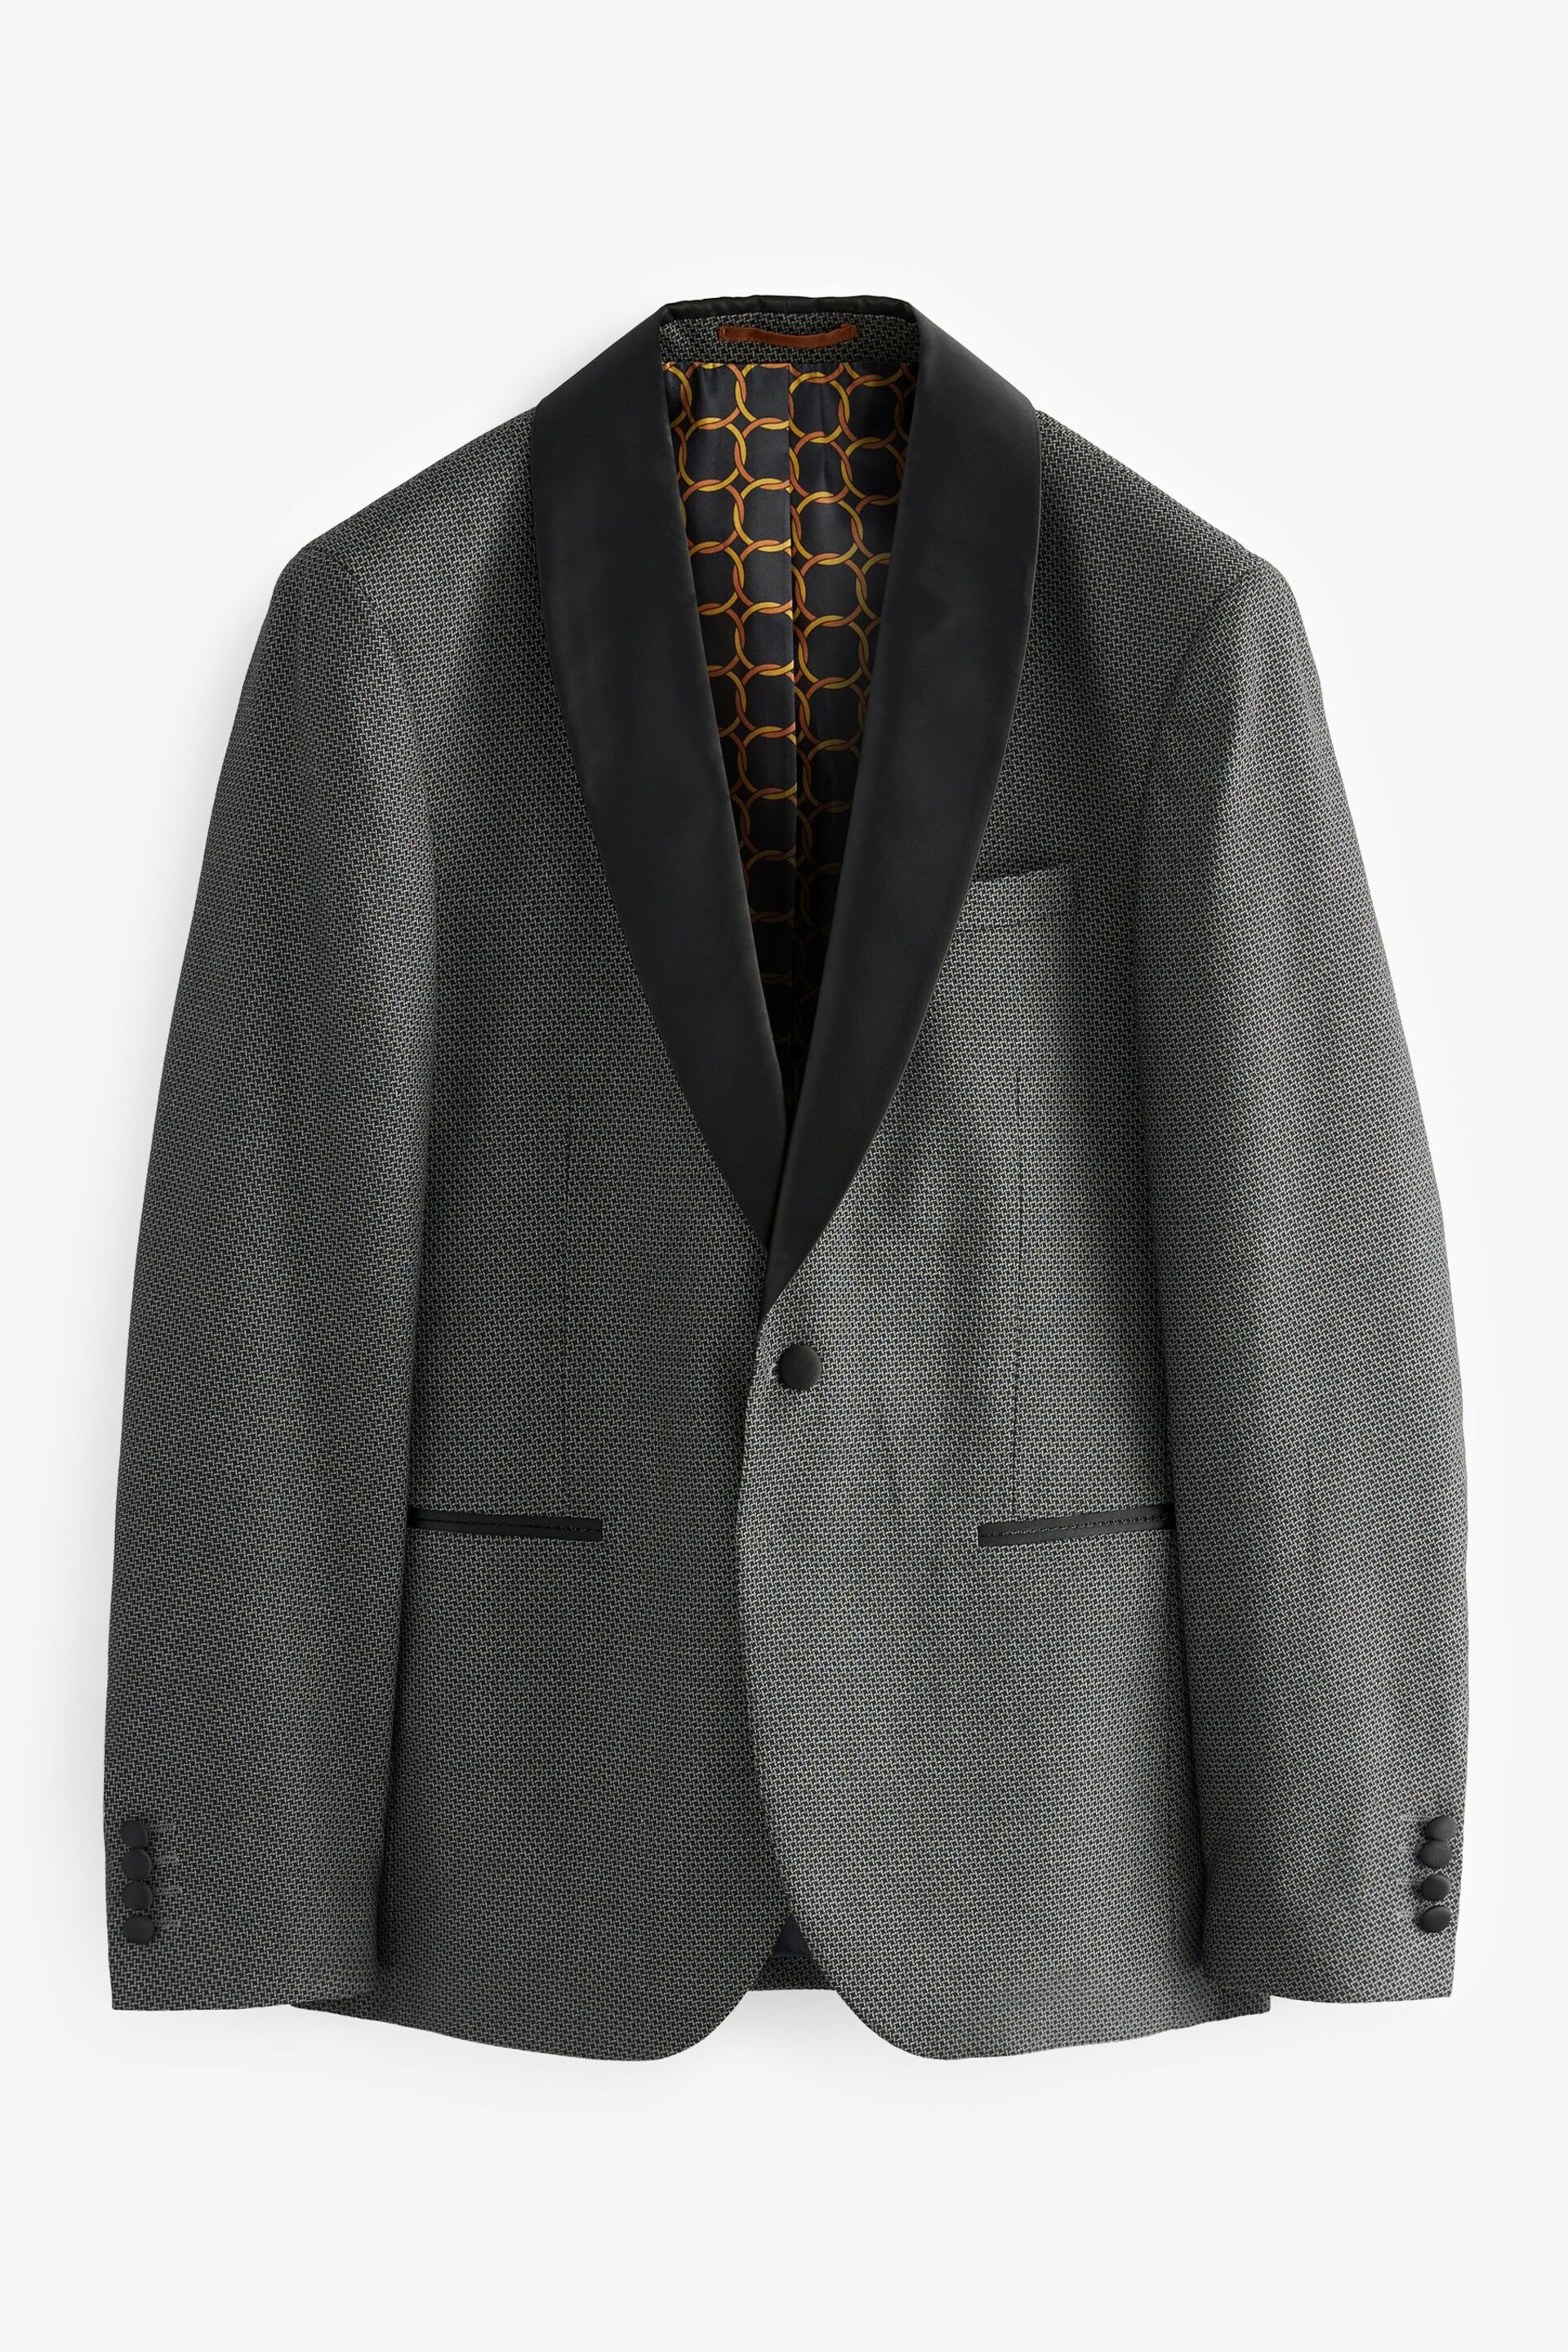 Charcoal Grey Tailored Textured Tuxedo Suit Jacket - Image 6 of 13